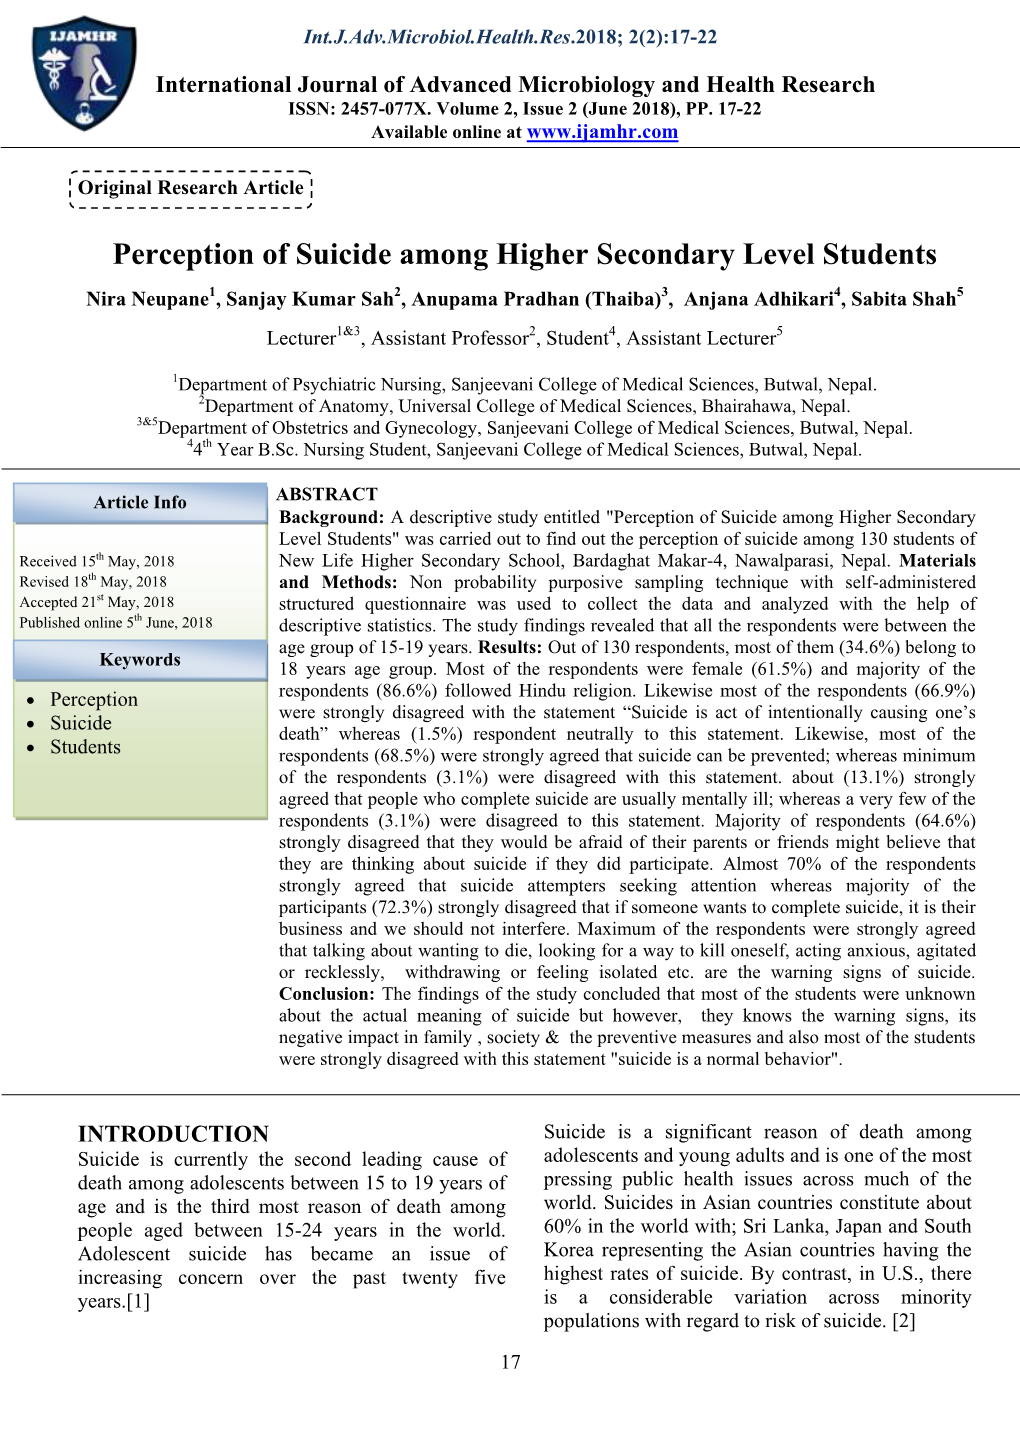 Perception of Suicide Among Higher Secondary Level Students